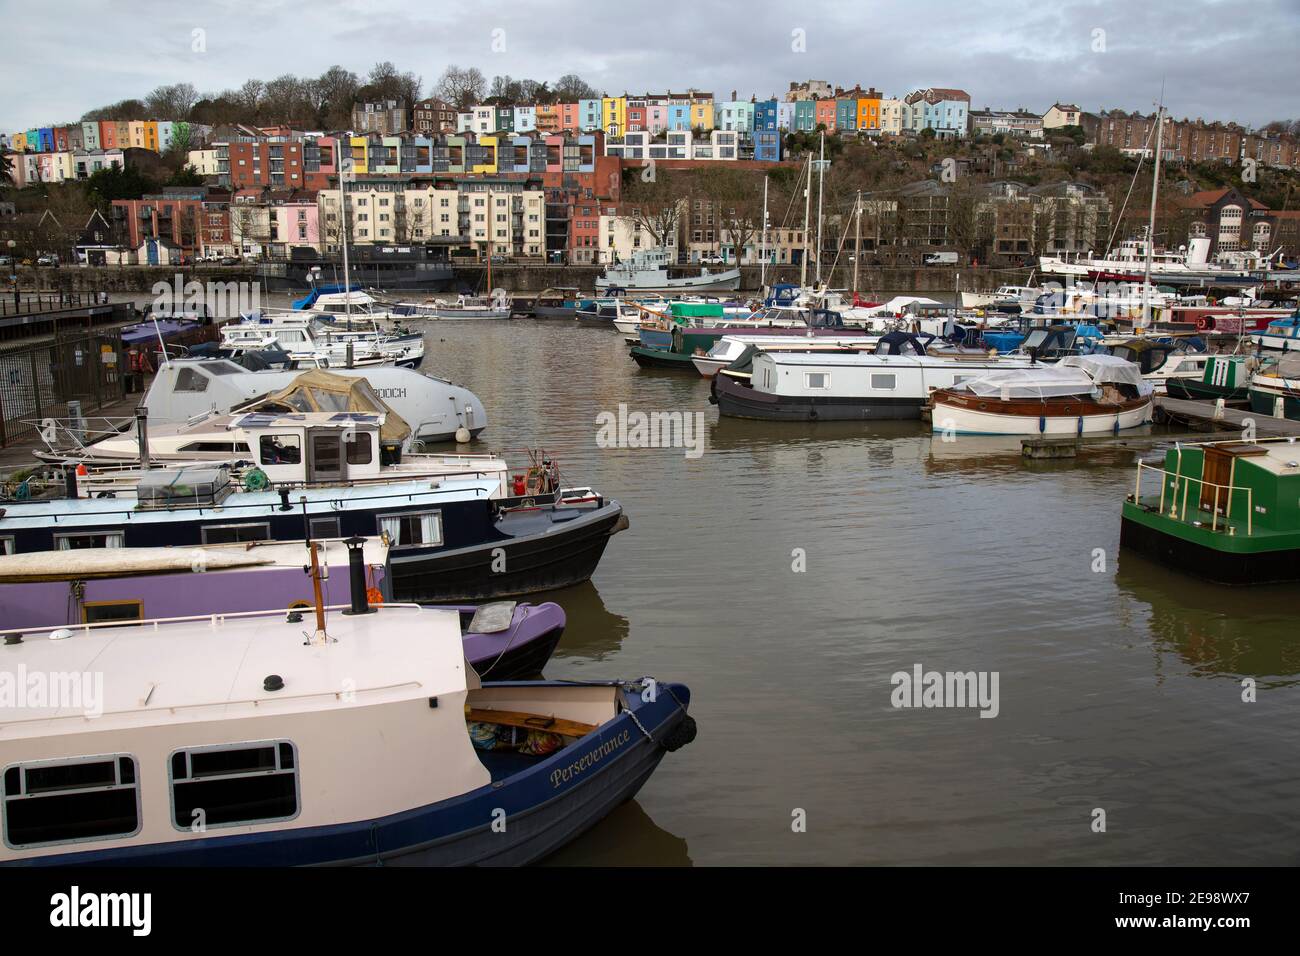 Amarina or wharf on the River Avon in Bristol, England. A variety of boats with colourful houses on a hill in the distance. Stock Photo